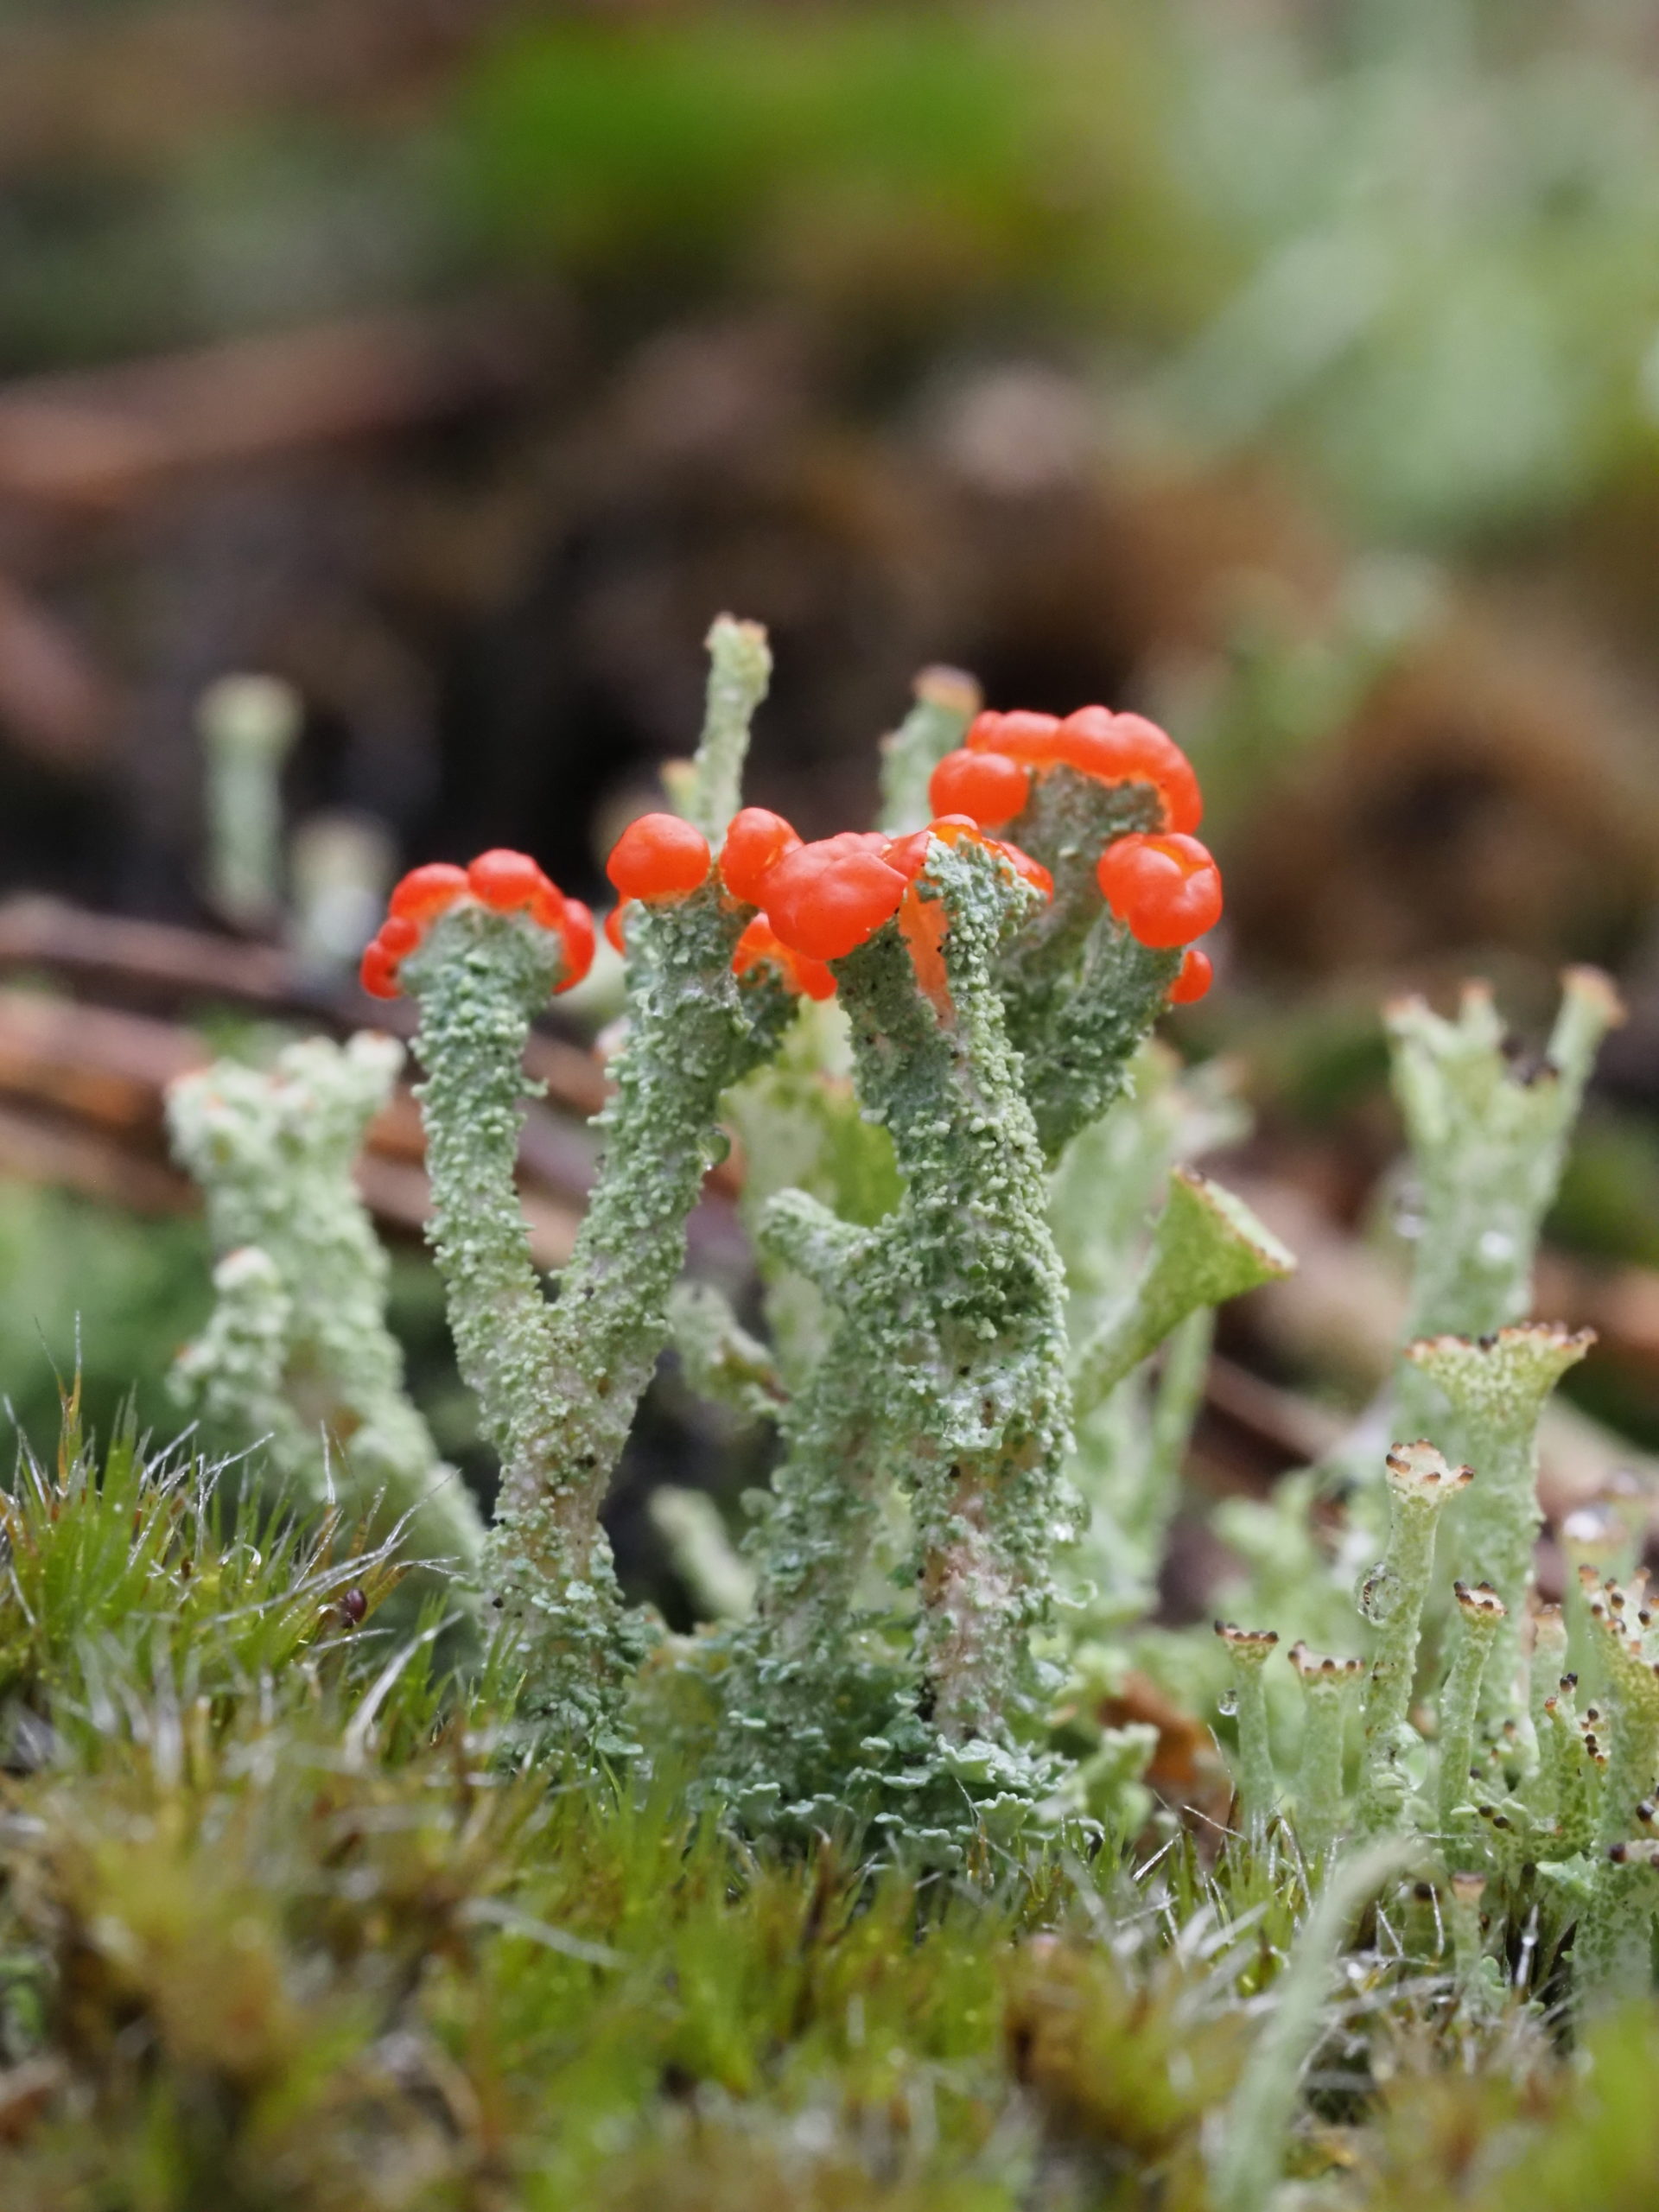 Colourful green and red stalk-like lichen